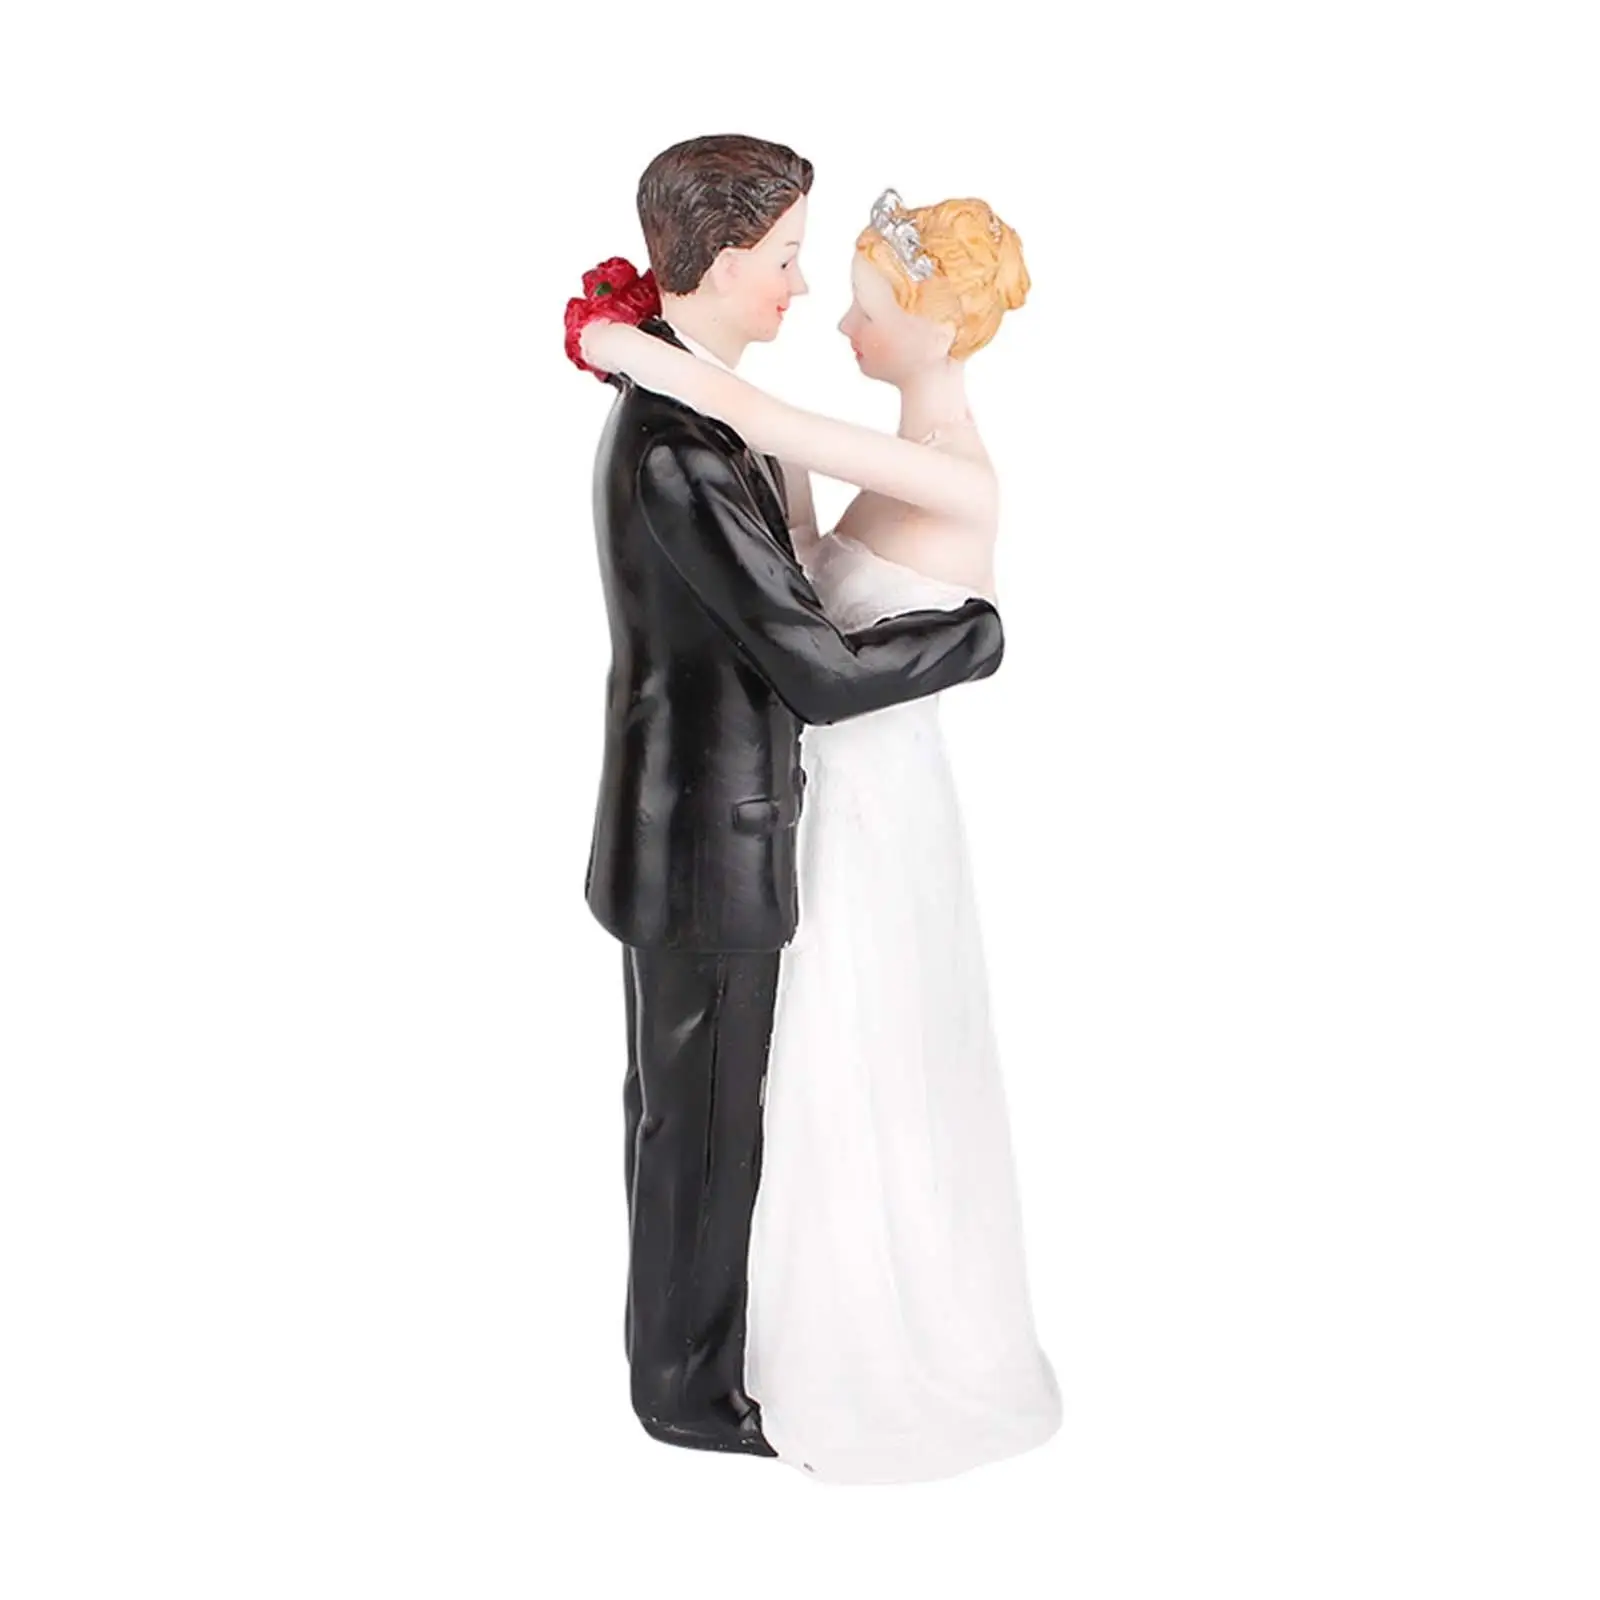 Wedding Cake Topper Couple Figurine 1x for Engagement Ready to Marry Gifts